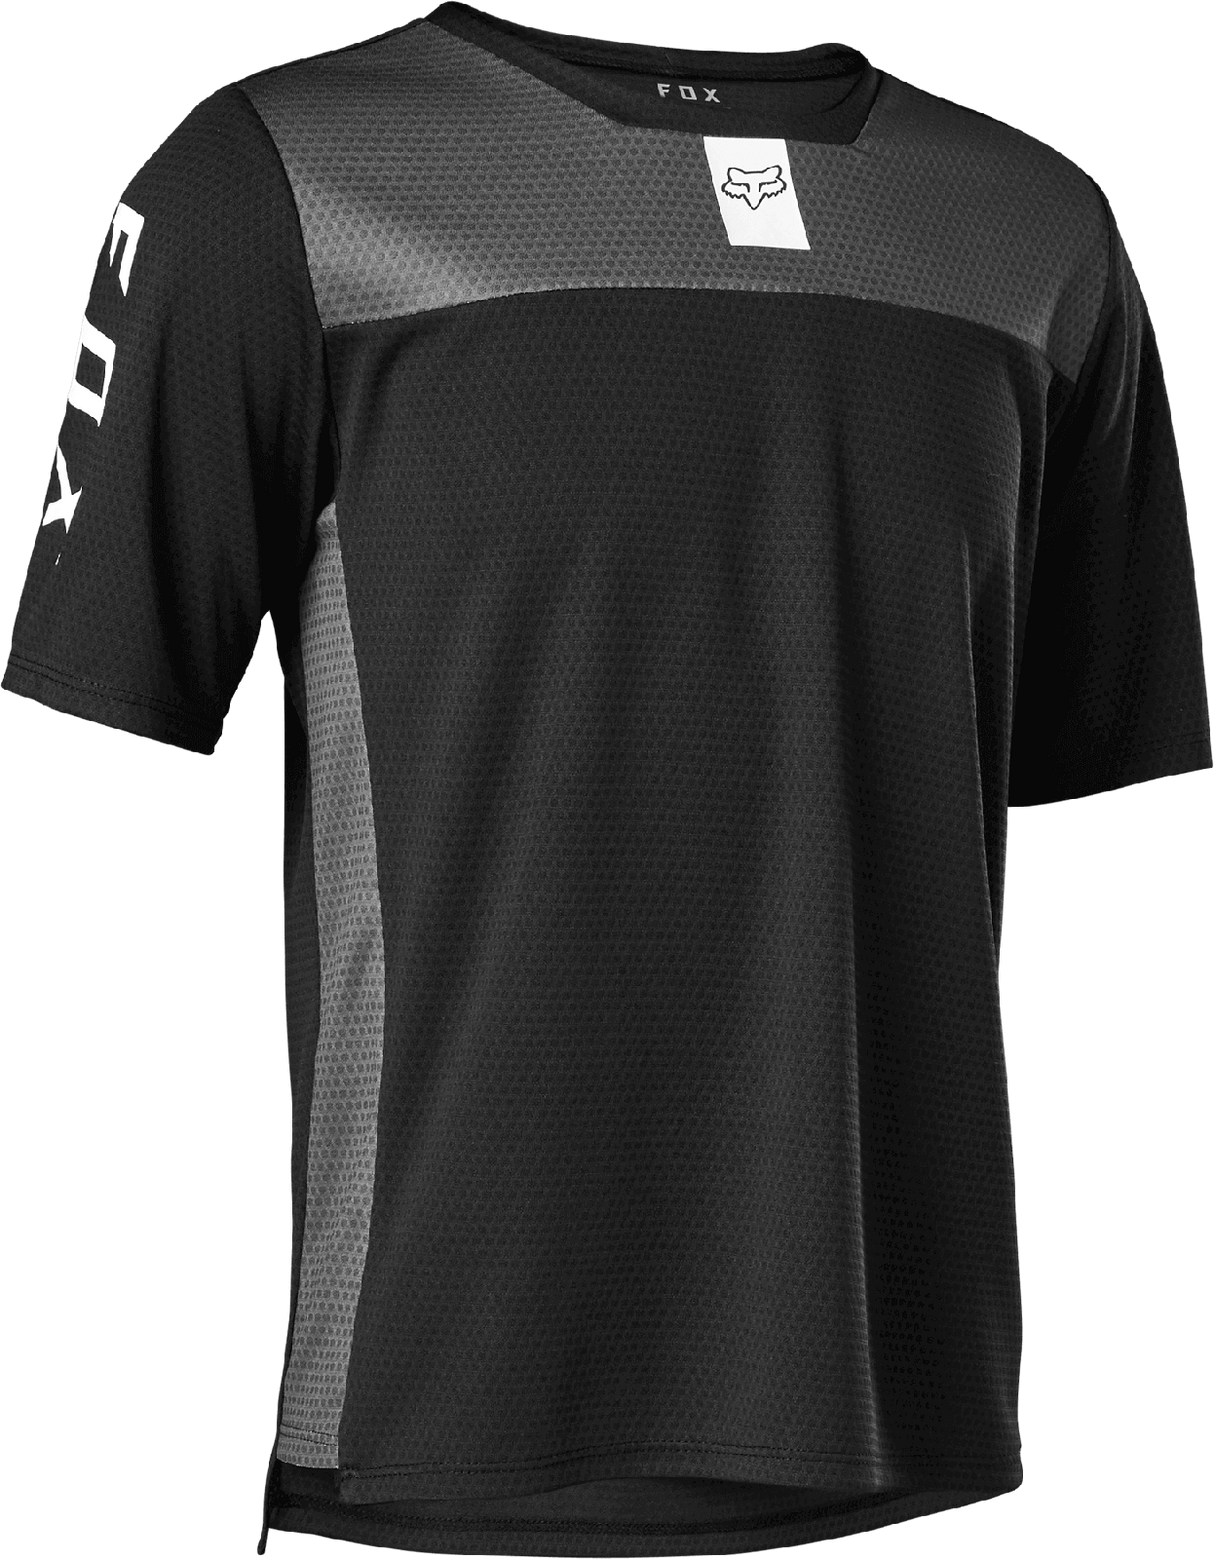 Fox Youth Defend SS Jersey - Black